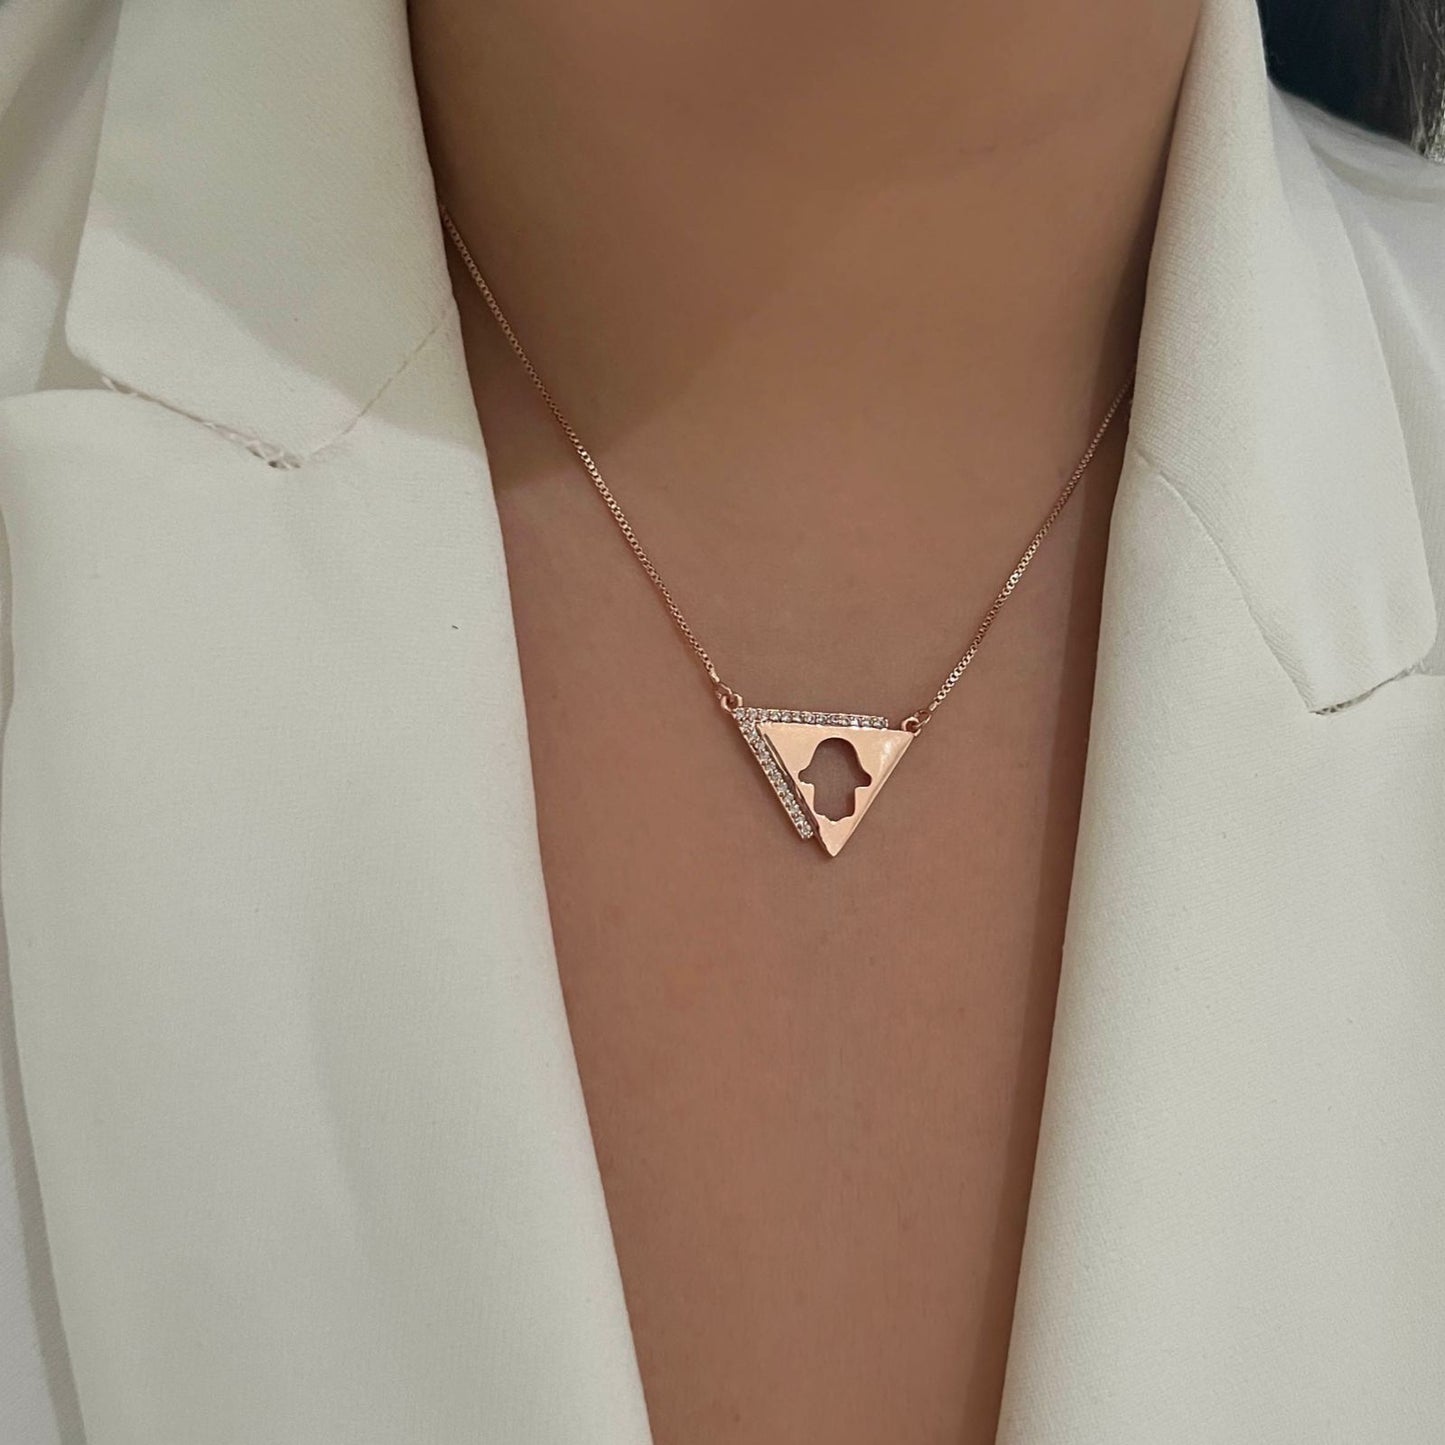 Triangle necklace with hand silhouette (896)